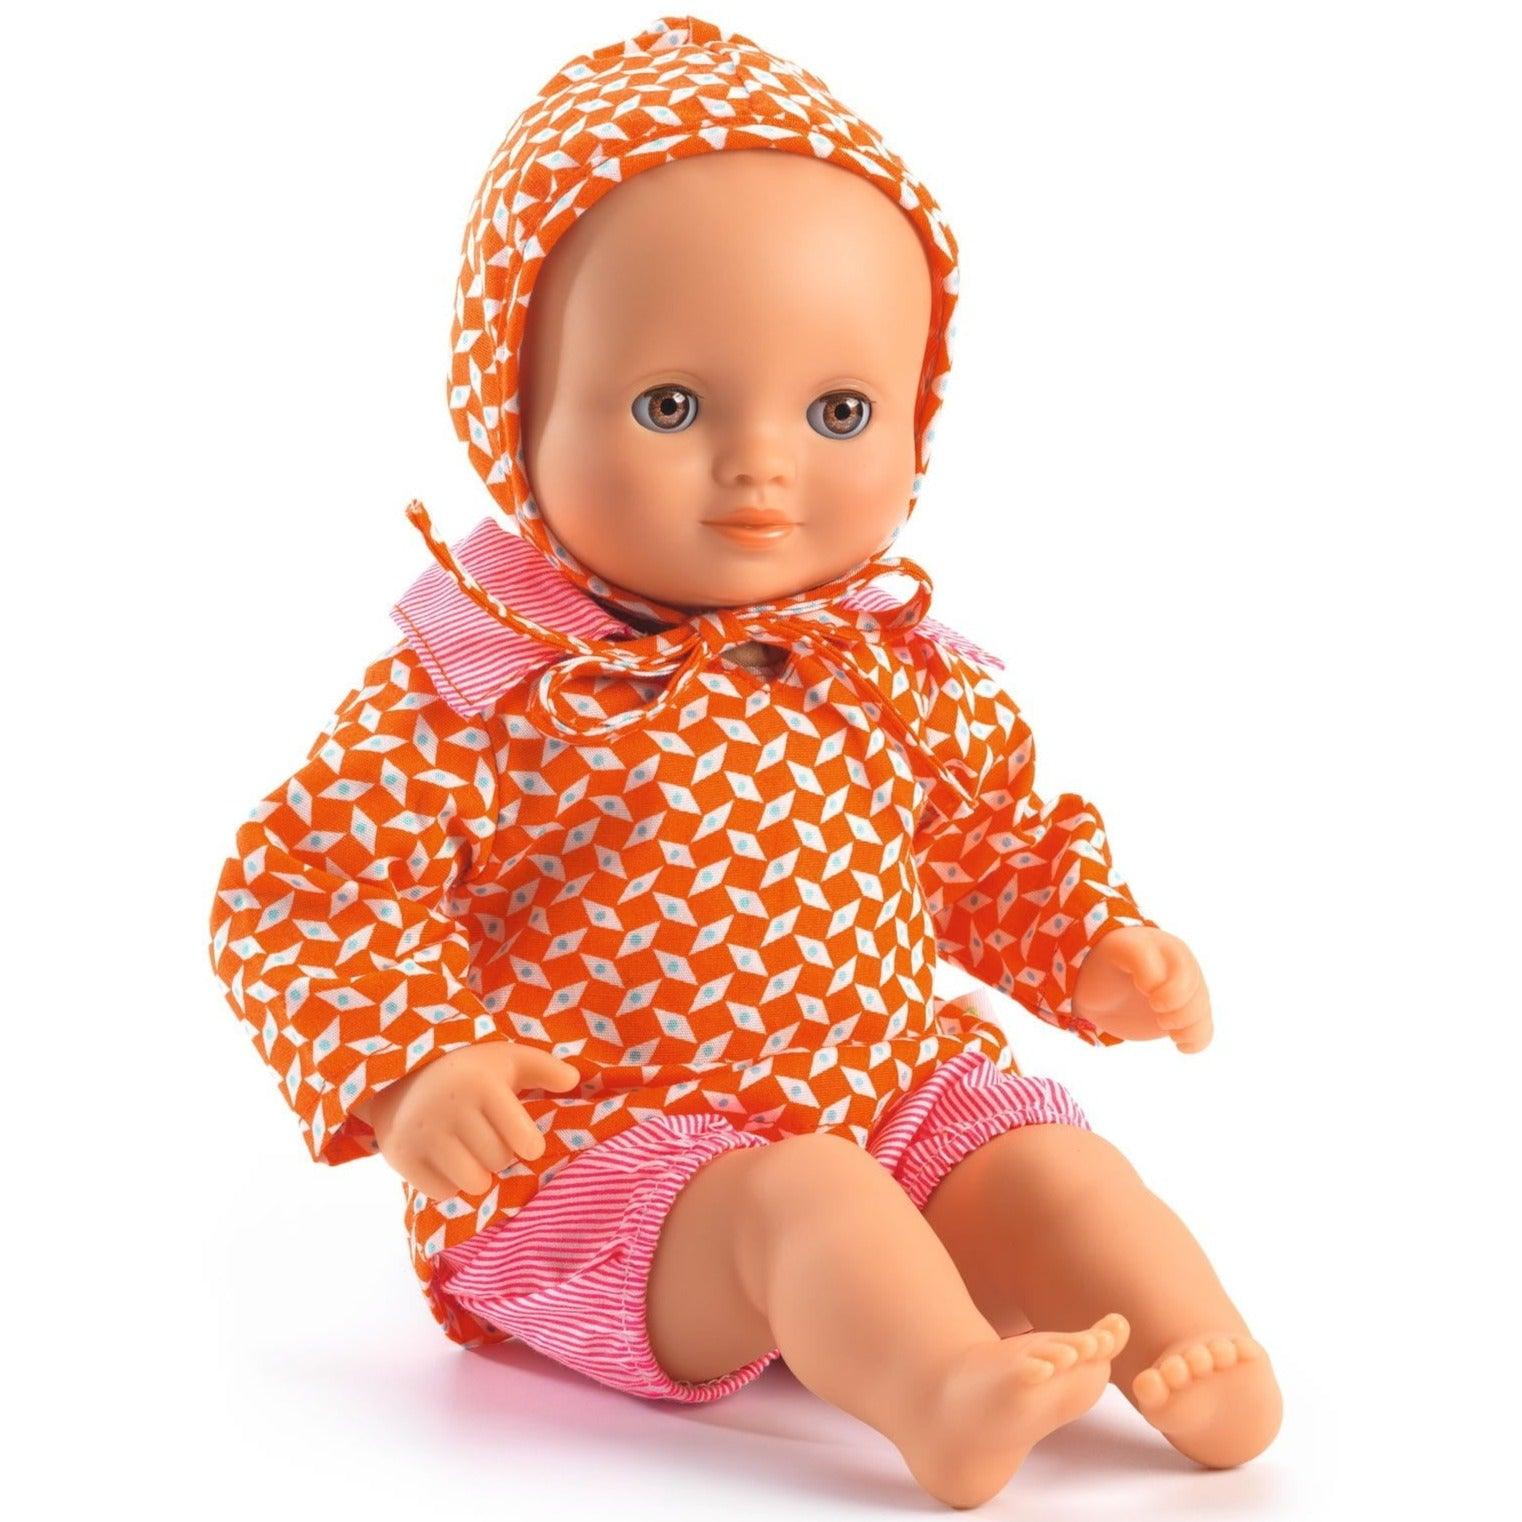 Pomea: orange and pink clothes for Petit Pan doll